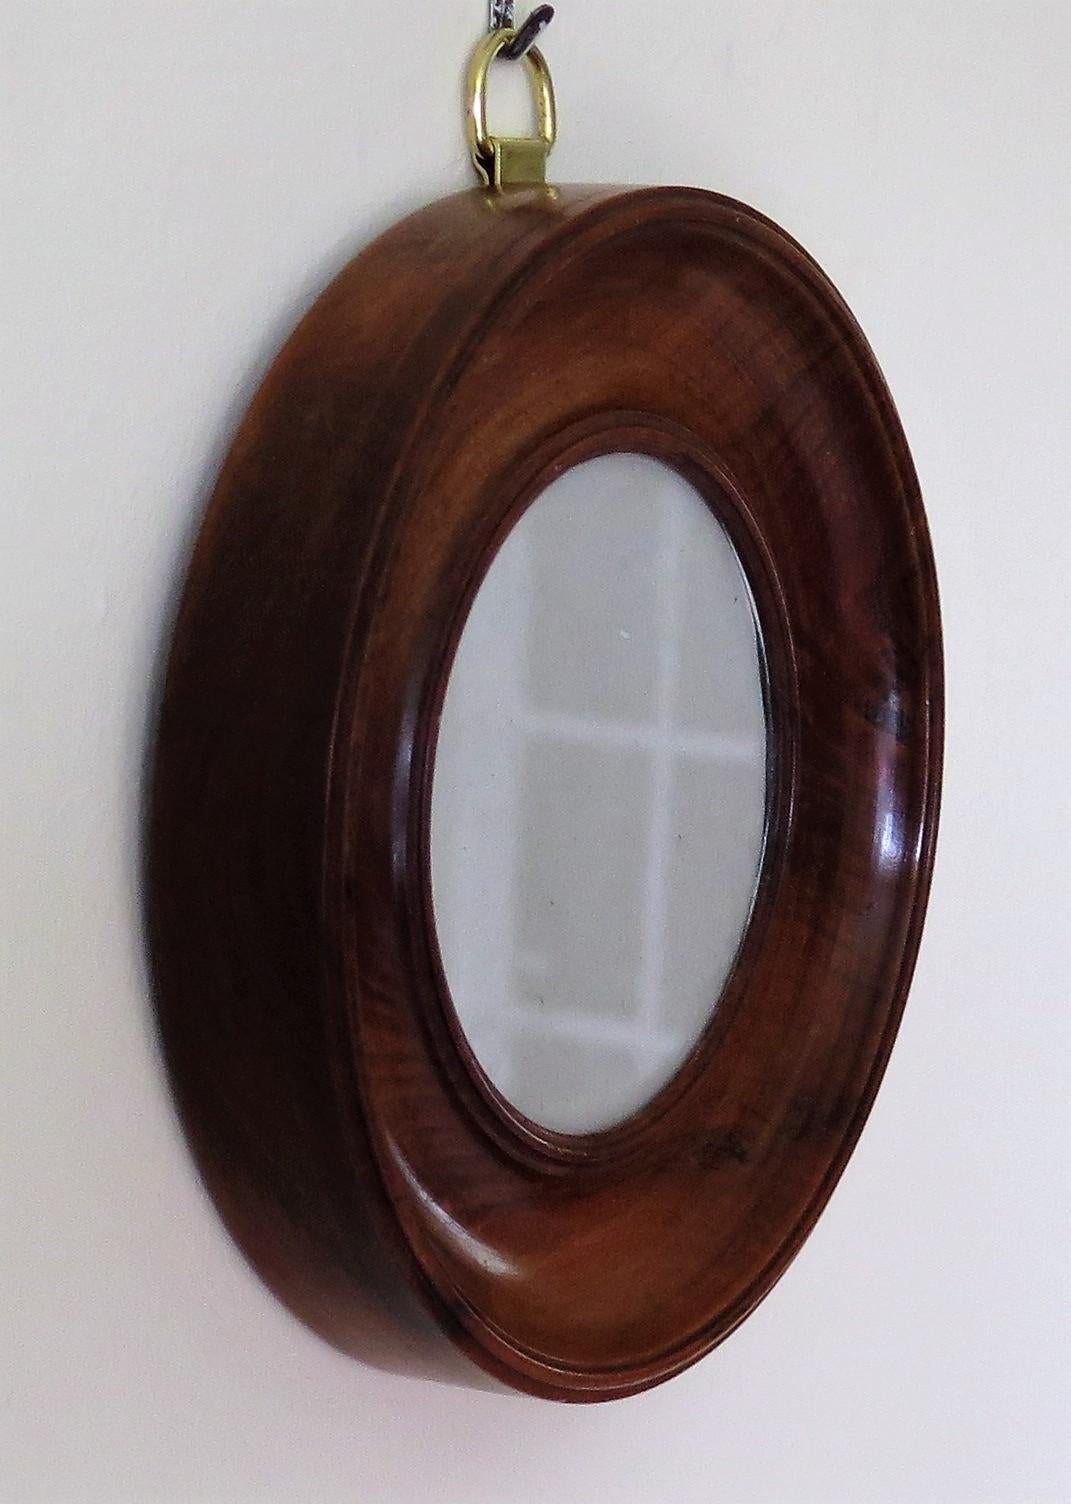 Hand-Crafted 19th Century Small Picture or Photo Frame Hand Turned Mahogany Wall Hanging